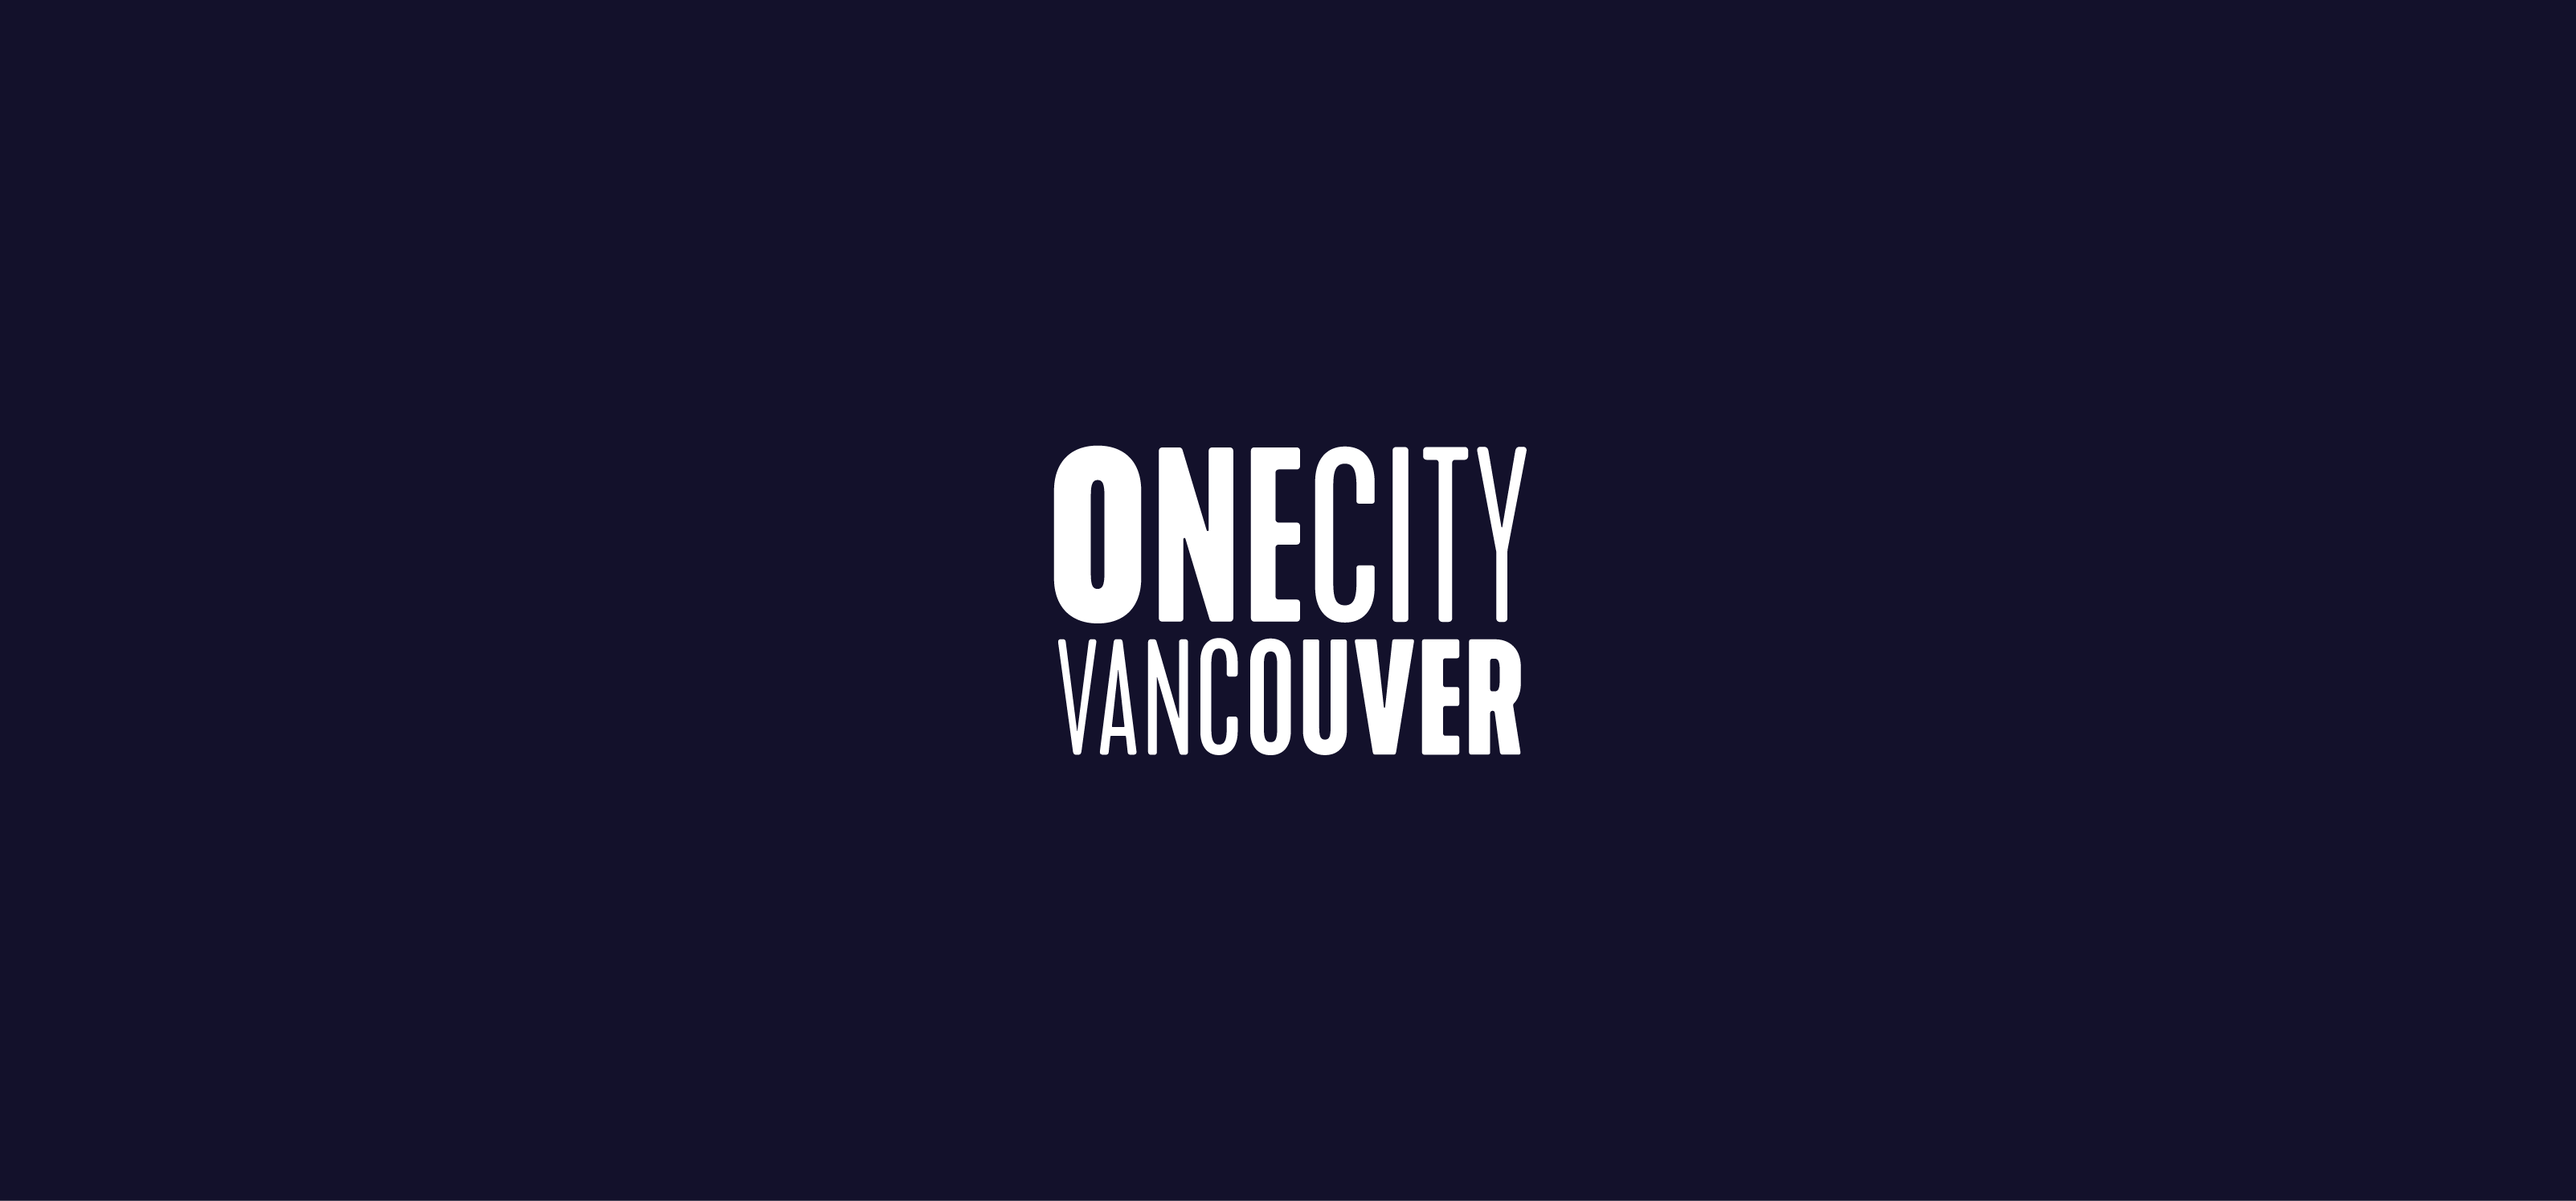 OneCity Vancouver